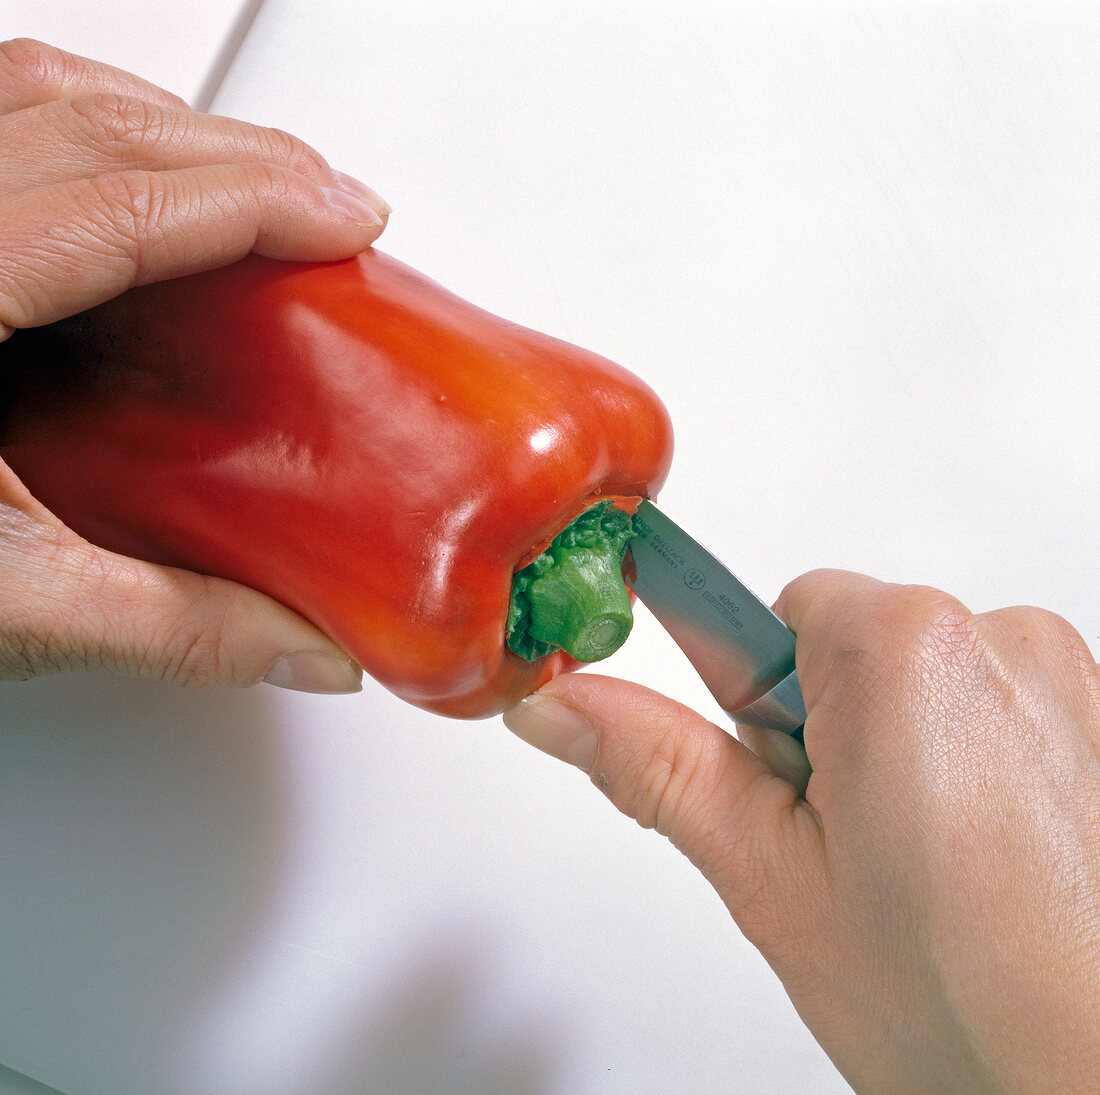 Close-up of hands cutting ends of red pepper, step 1